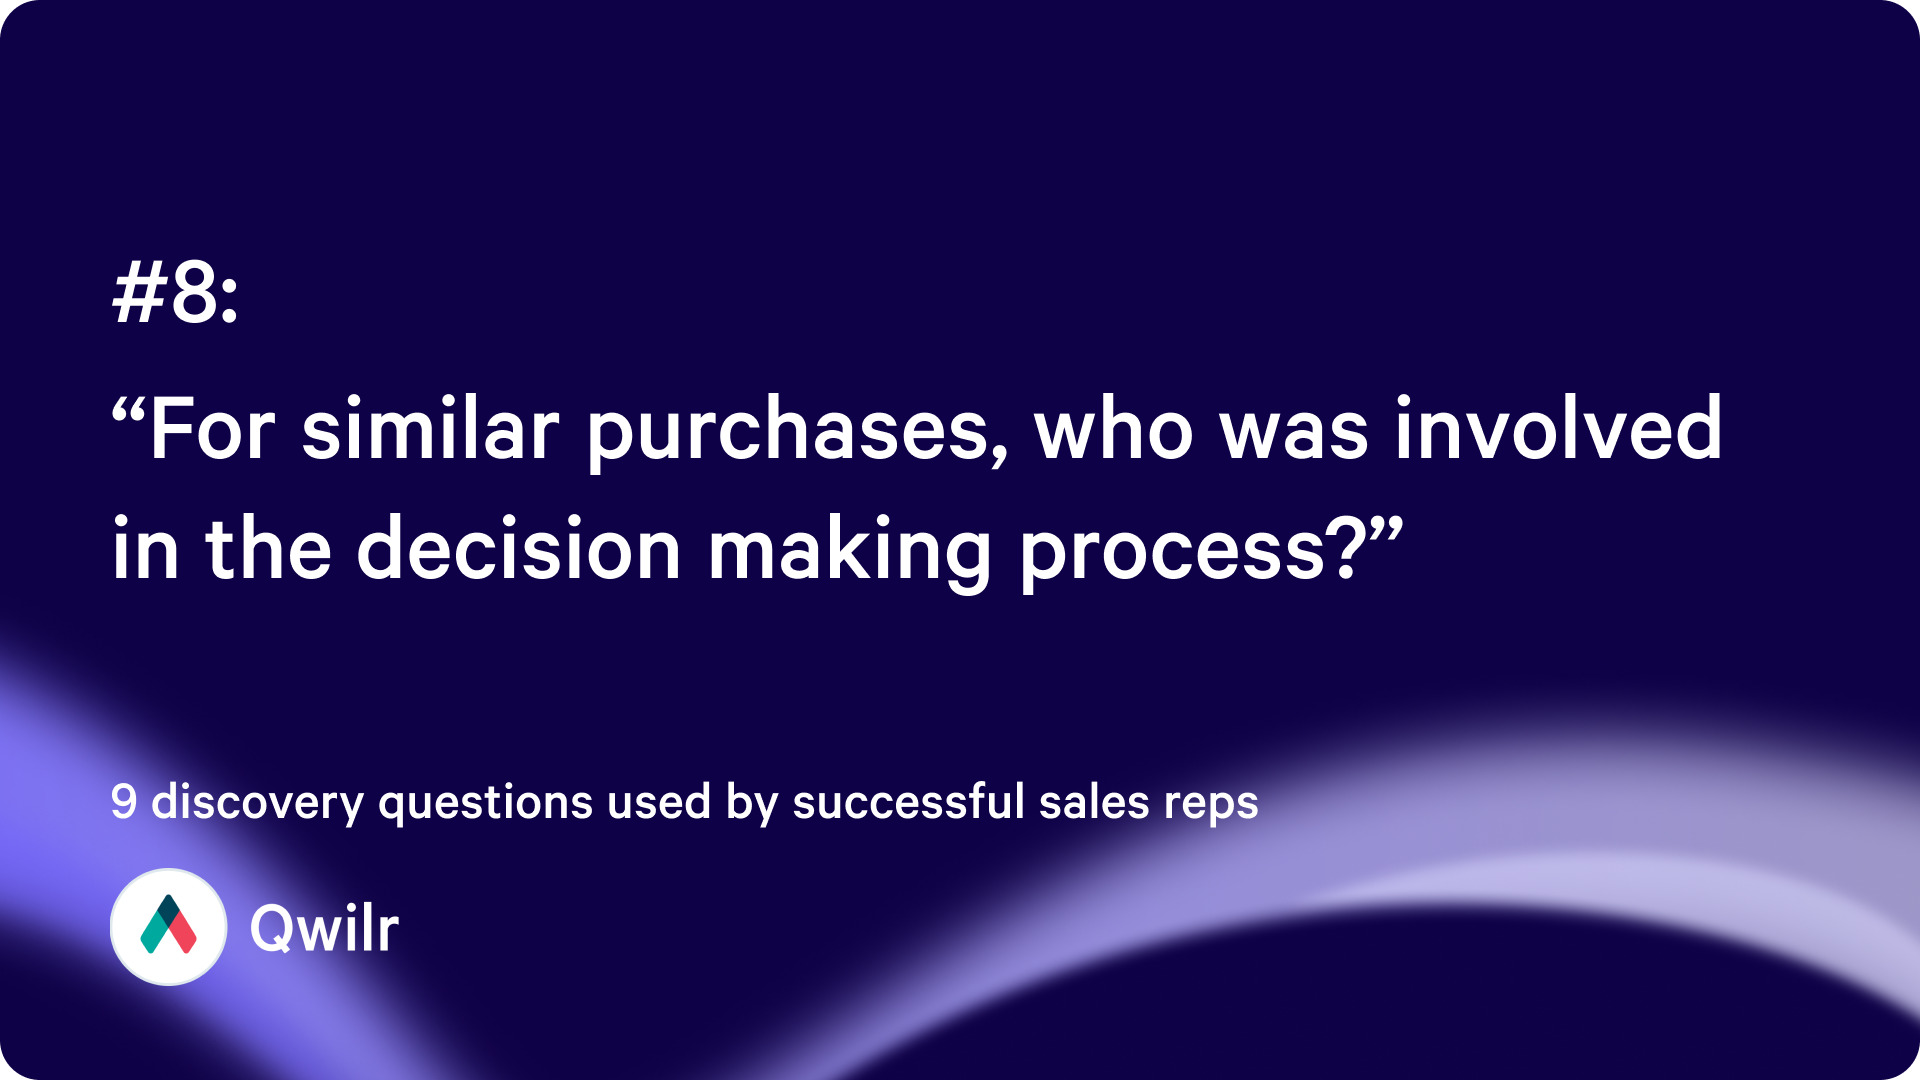 “For similar purchases, who was involved in the decision marketing process?”